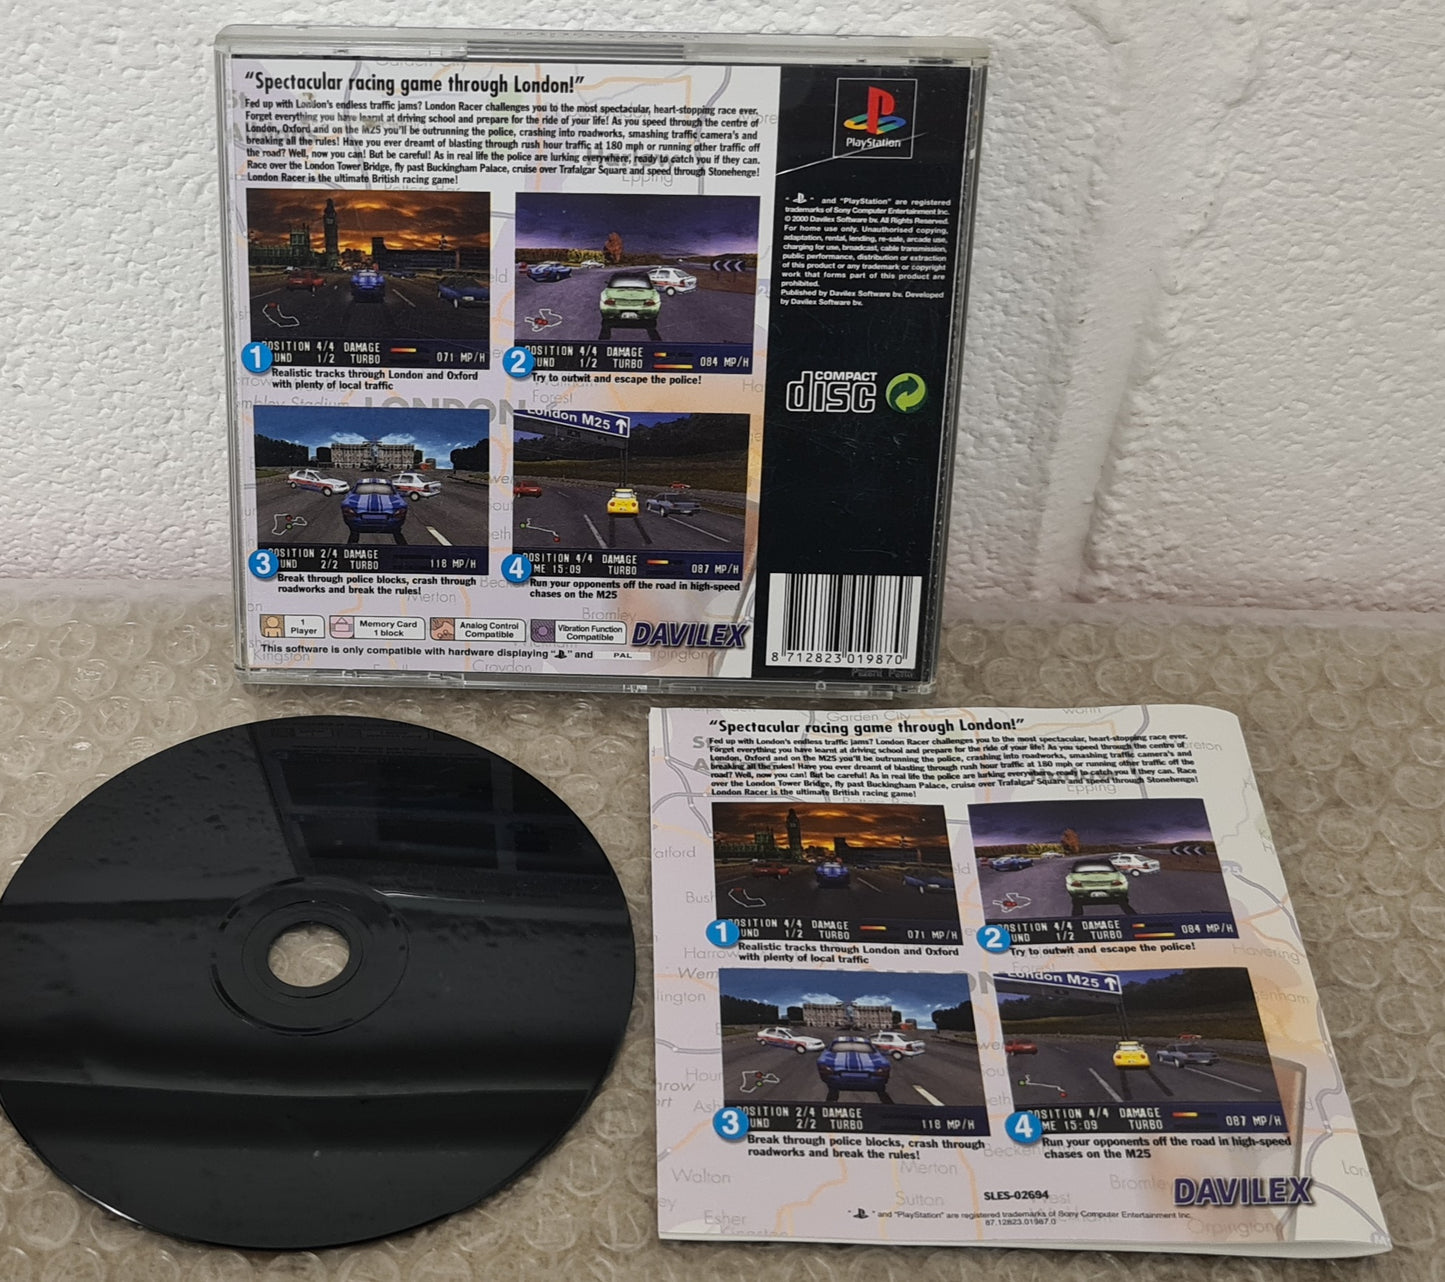 London Racer Sony Playstation 1 (PS1) Game